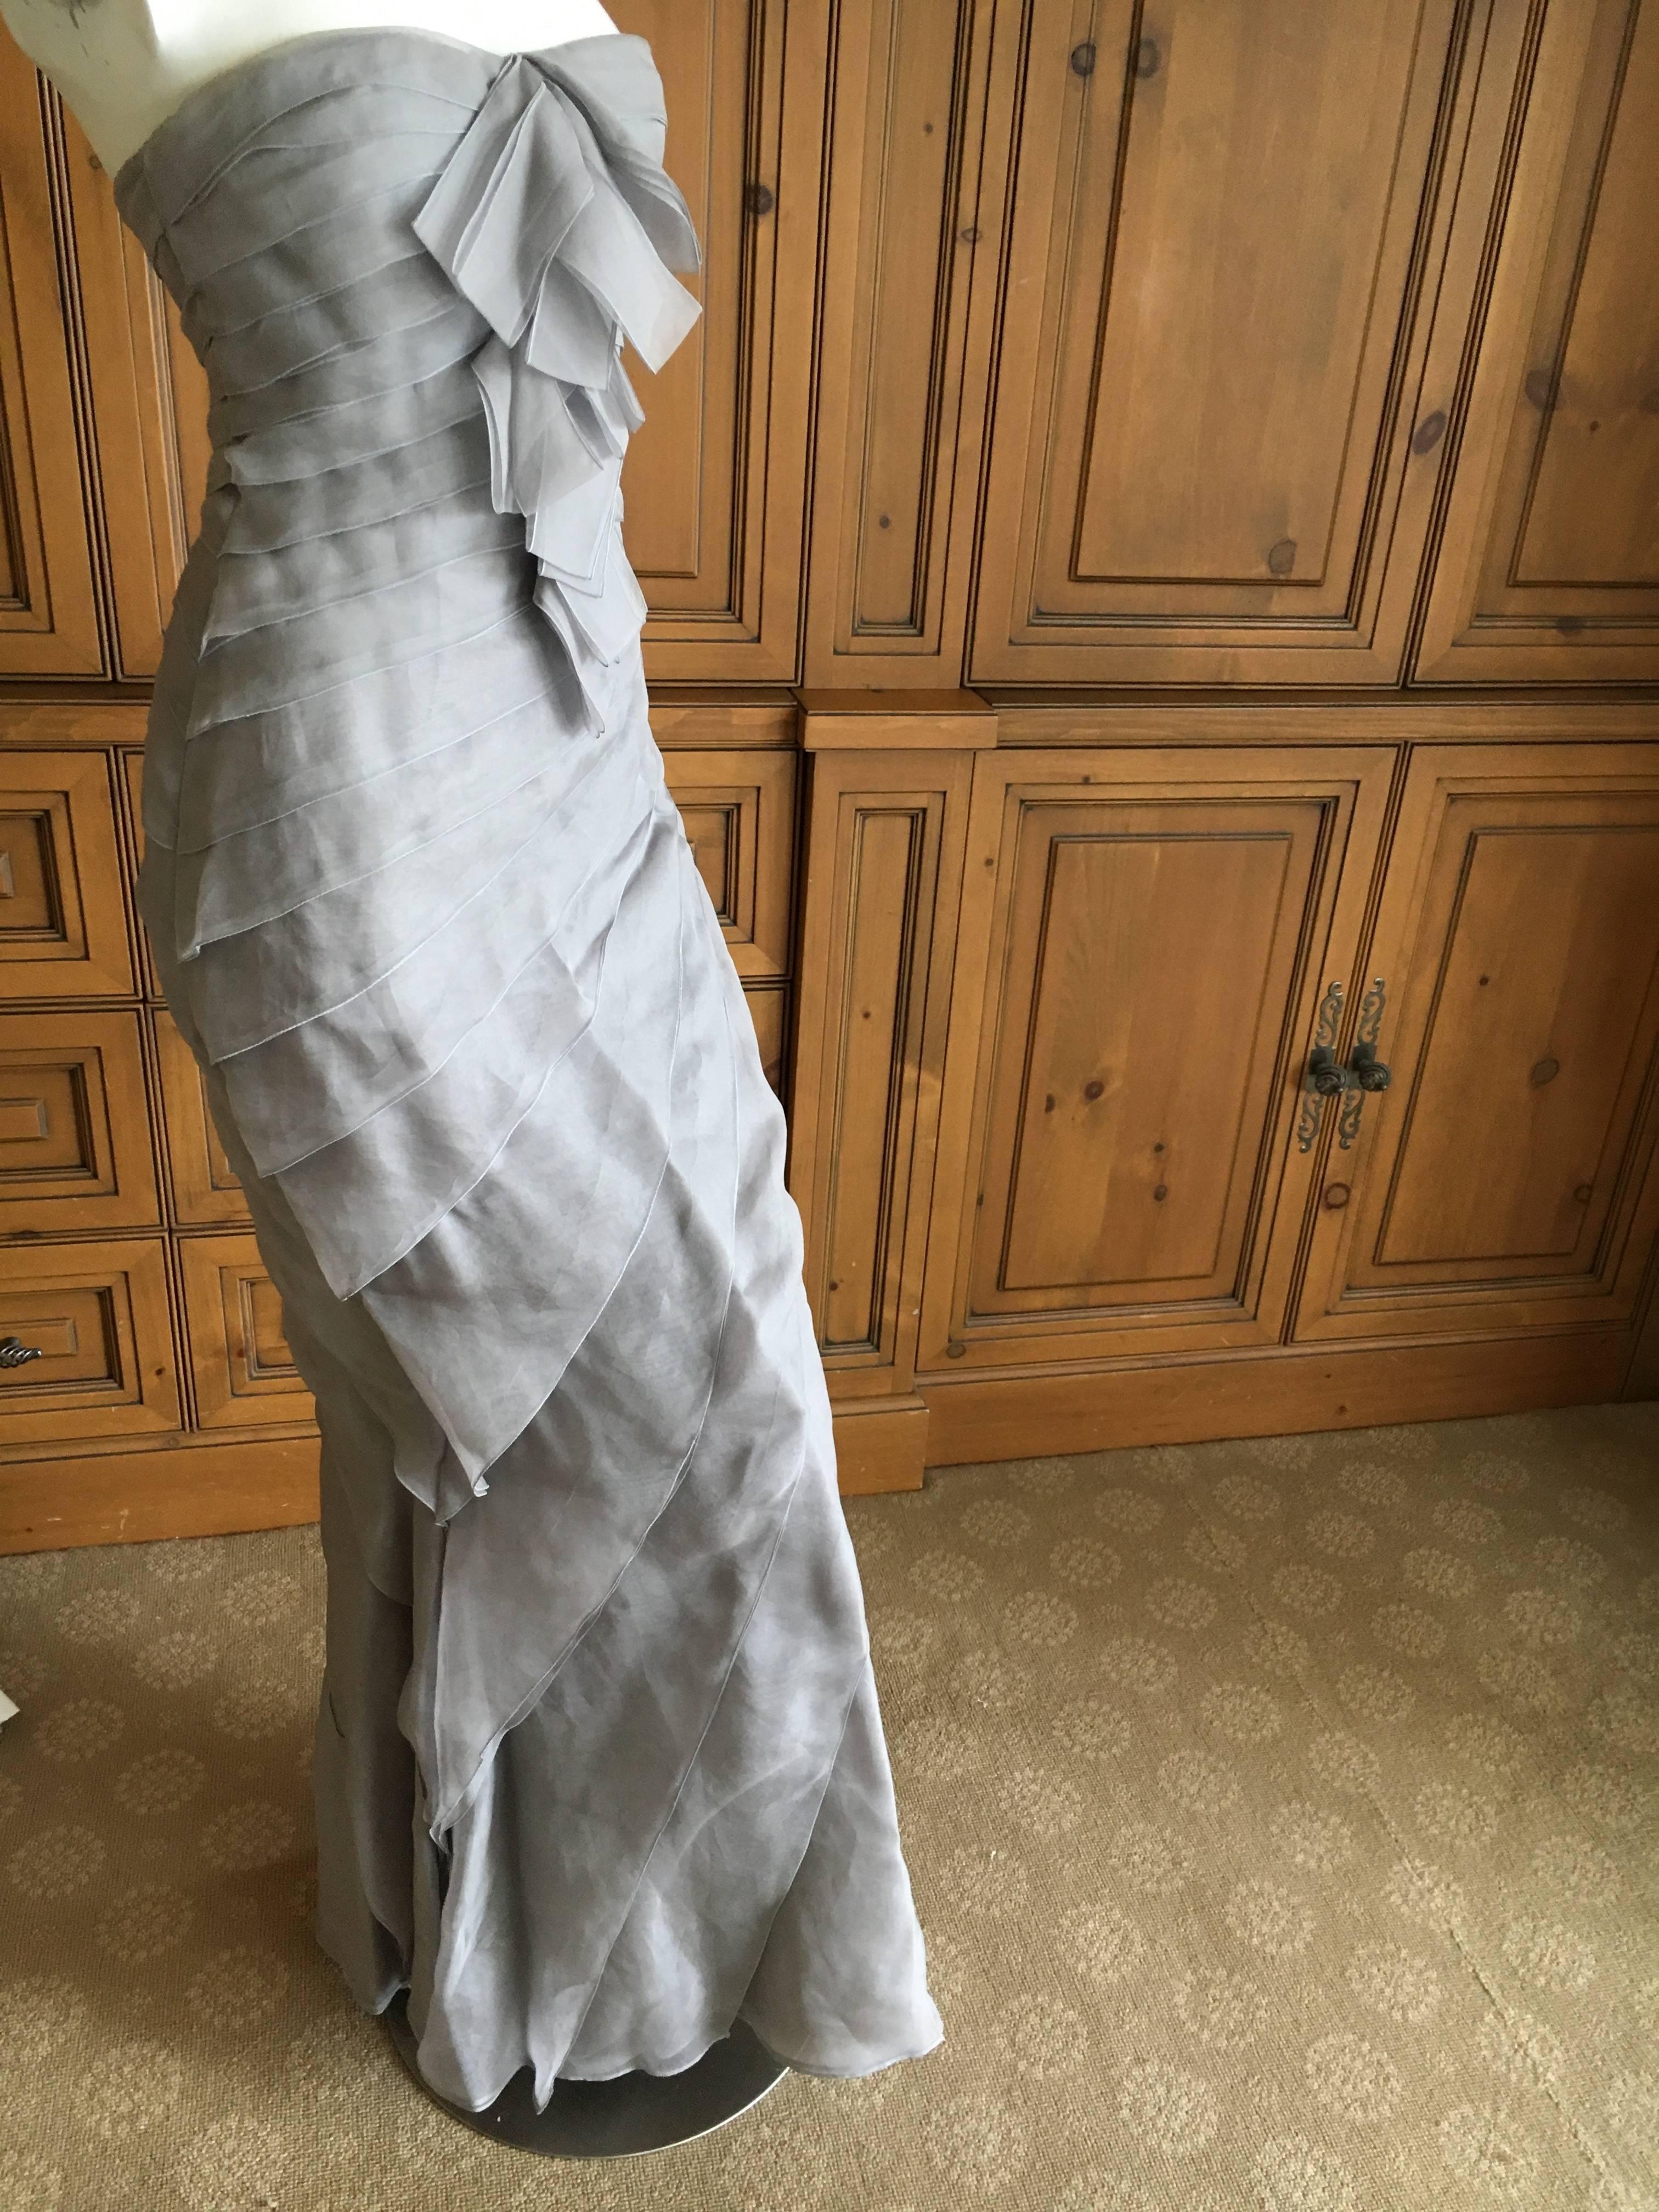  Exquisite Dior by John Galliano Strapless Gray Silk Tiered Evening Dress w Inner Corset.
This is so much prettier than the photos show.
Size 36
Bust 36"
Waist 25"
Hips 40"
Length 50"
Excellent condition